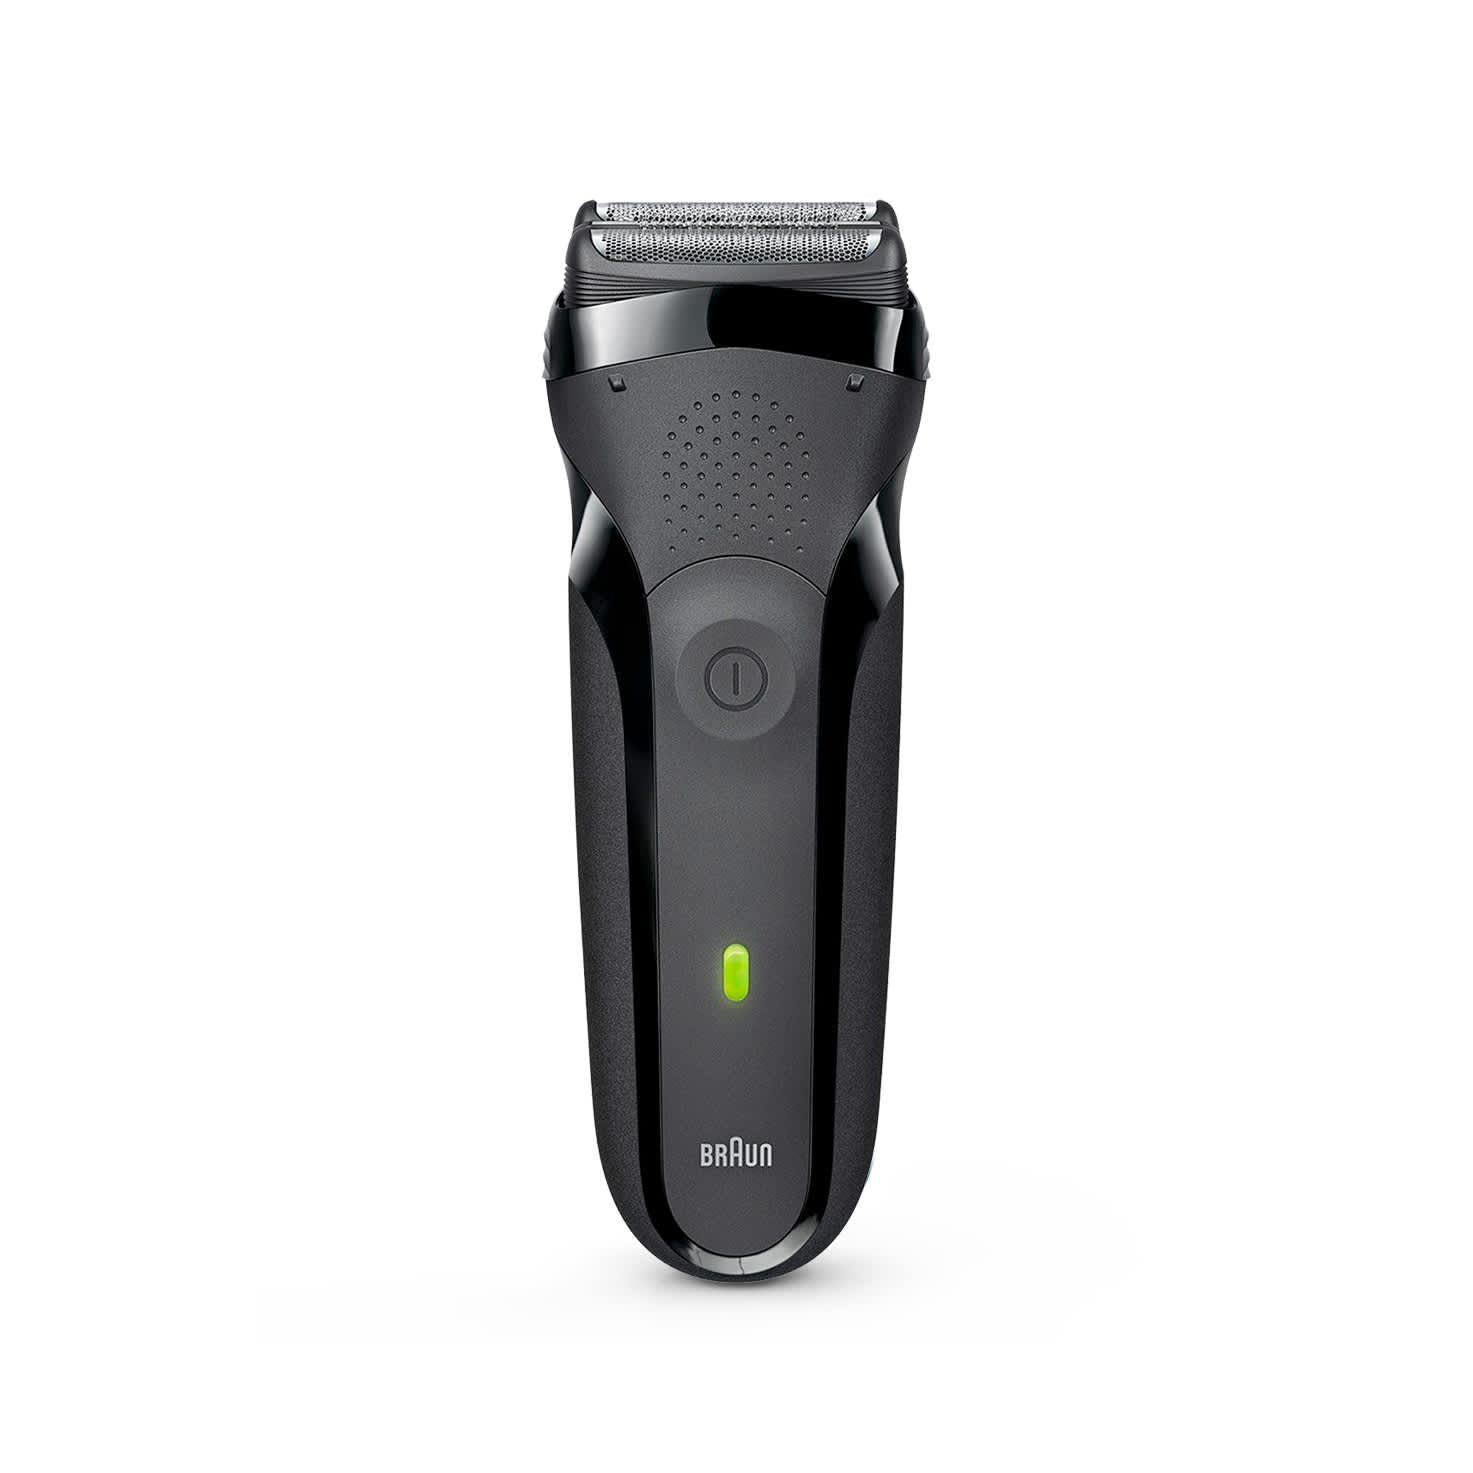 Braun Men's Series 3 300s Waterproof Electric Shaver with Protection Cap - Black - Healthxpress.ie